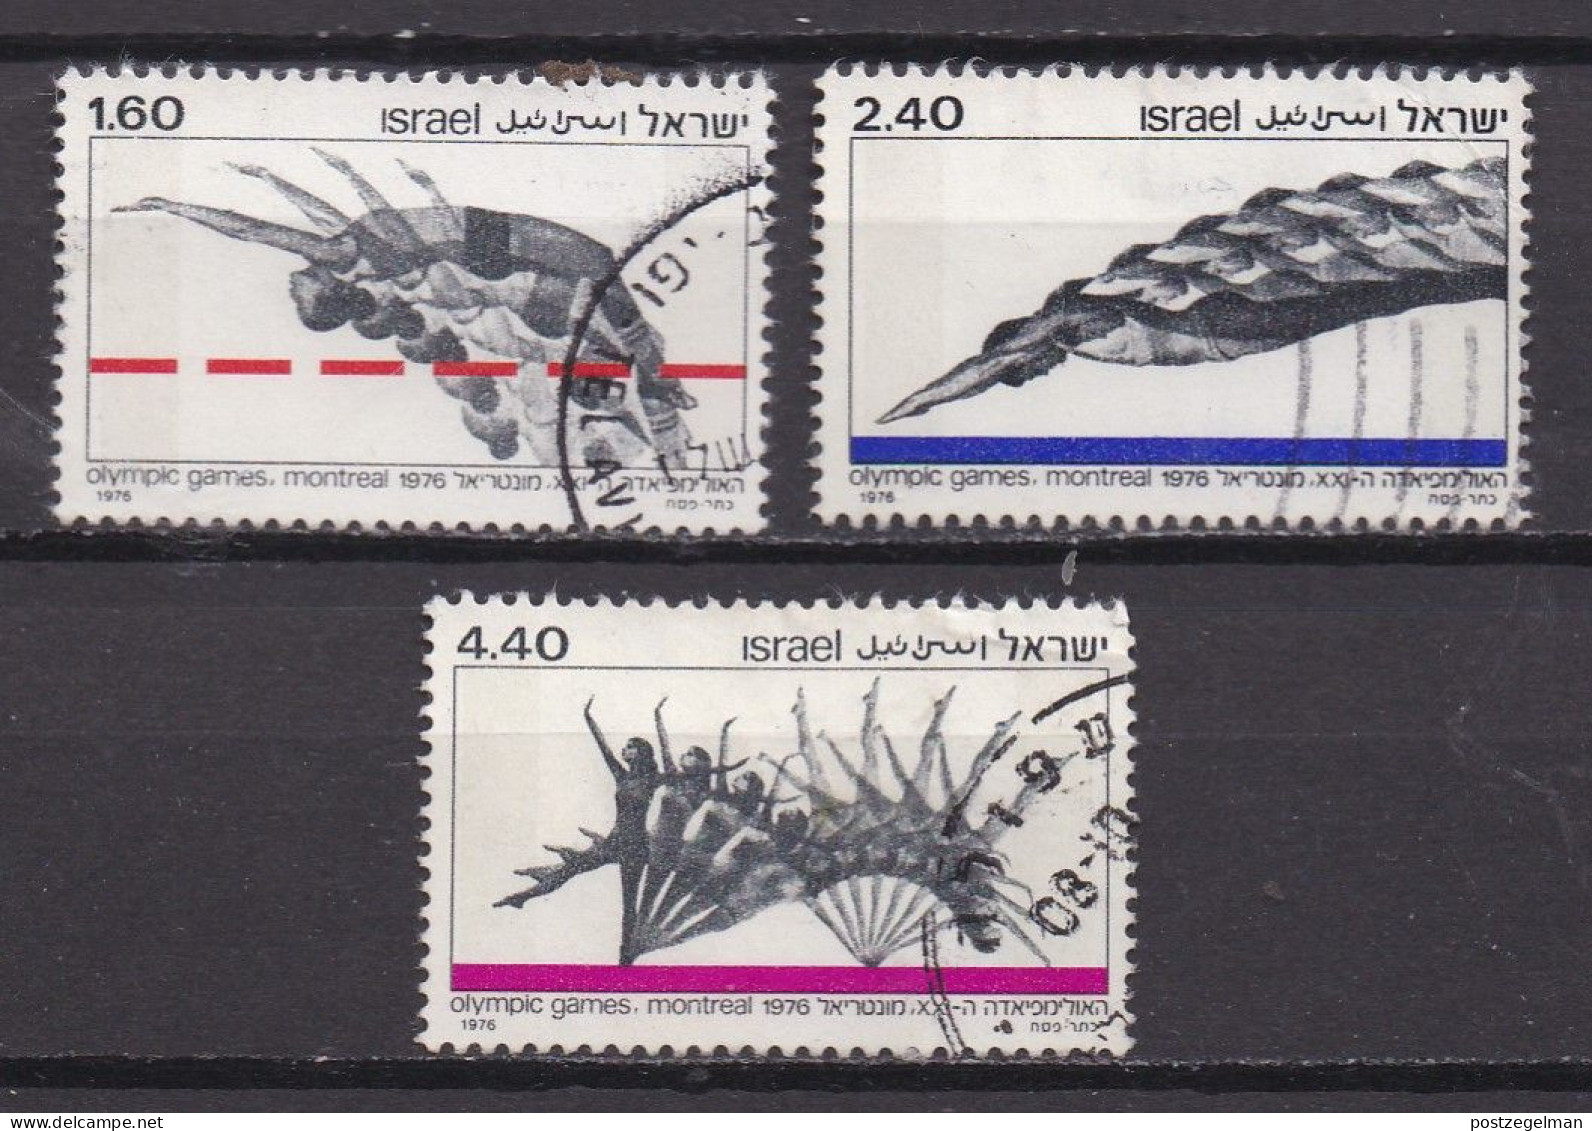 ISRAEL, 1976, Used Stamp(s)  Without  Tab, Olympic Games - Montreal, SG Number(s) 636-638, Scannr. 19166 - Used Stamps (without Tabs)